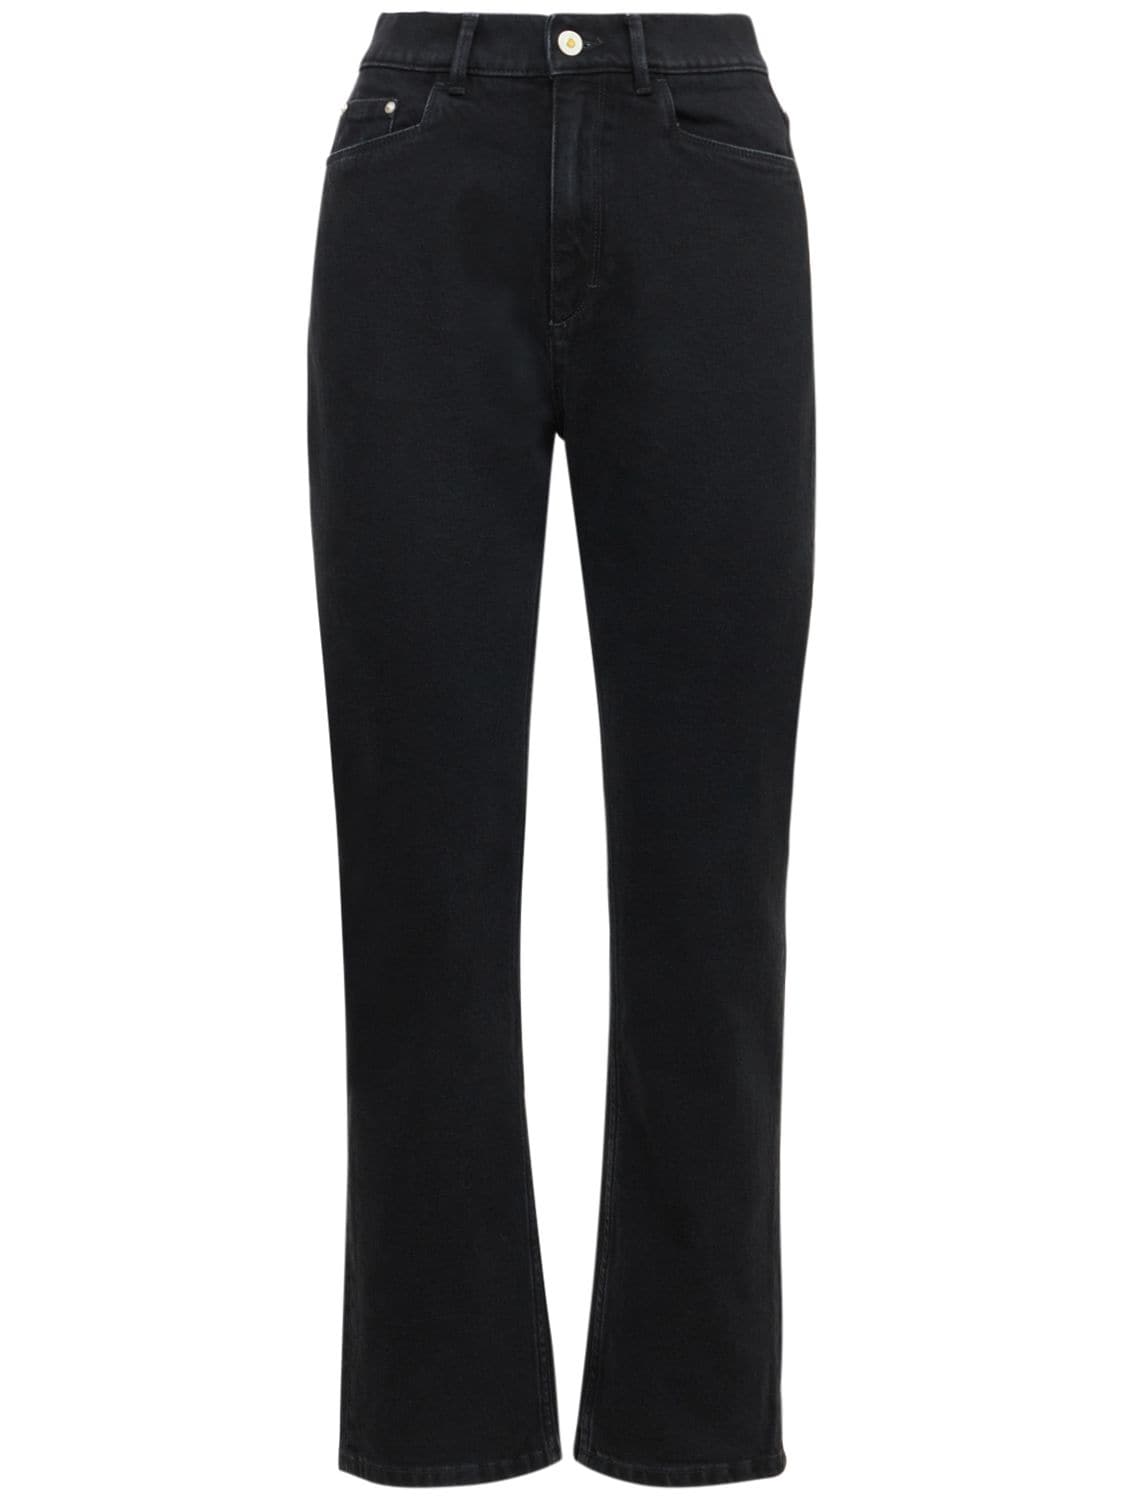 Carnation Straight Mid Rise Jeans